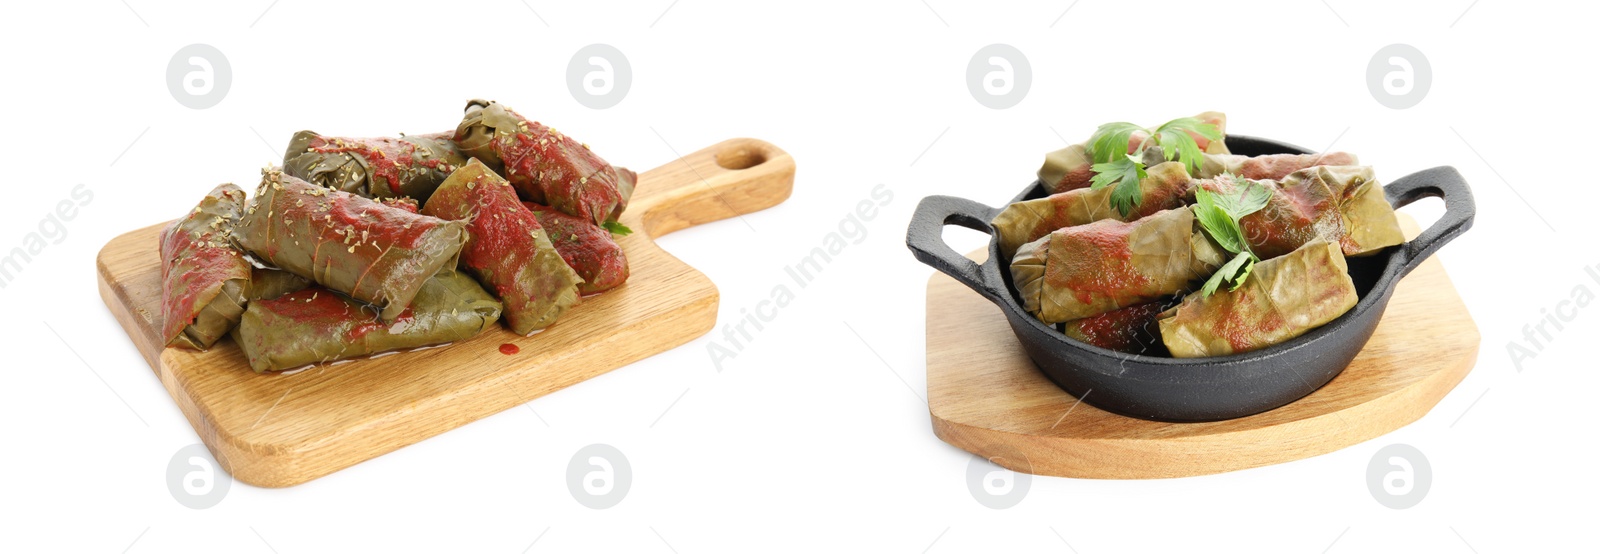 Image of Delicious stuffed grape leaves with tomato sauce on white background, collage. Banner design 